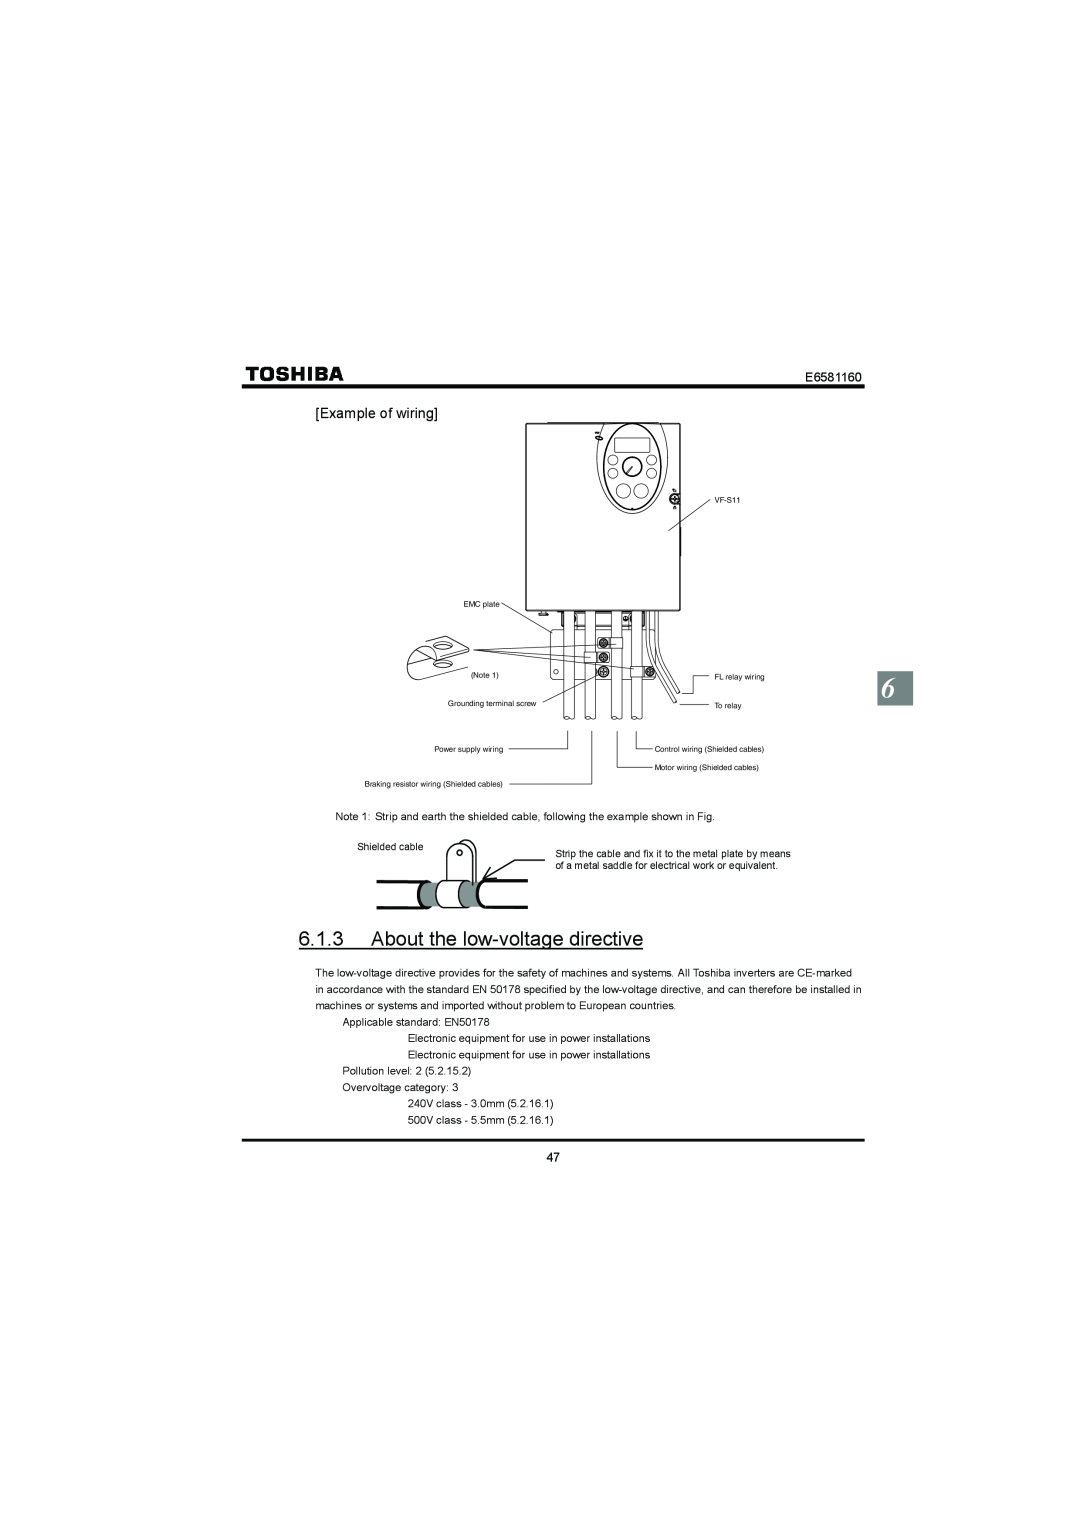 Toshiba VF-S11 manual 6.1.3About the low-voltagedirective, Example of wiring, E6581160 